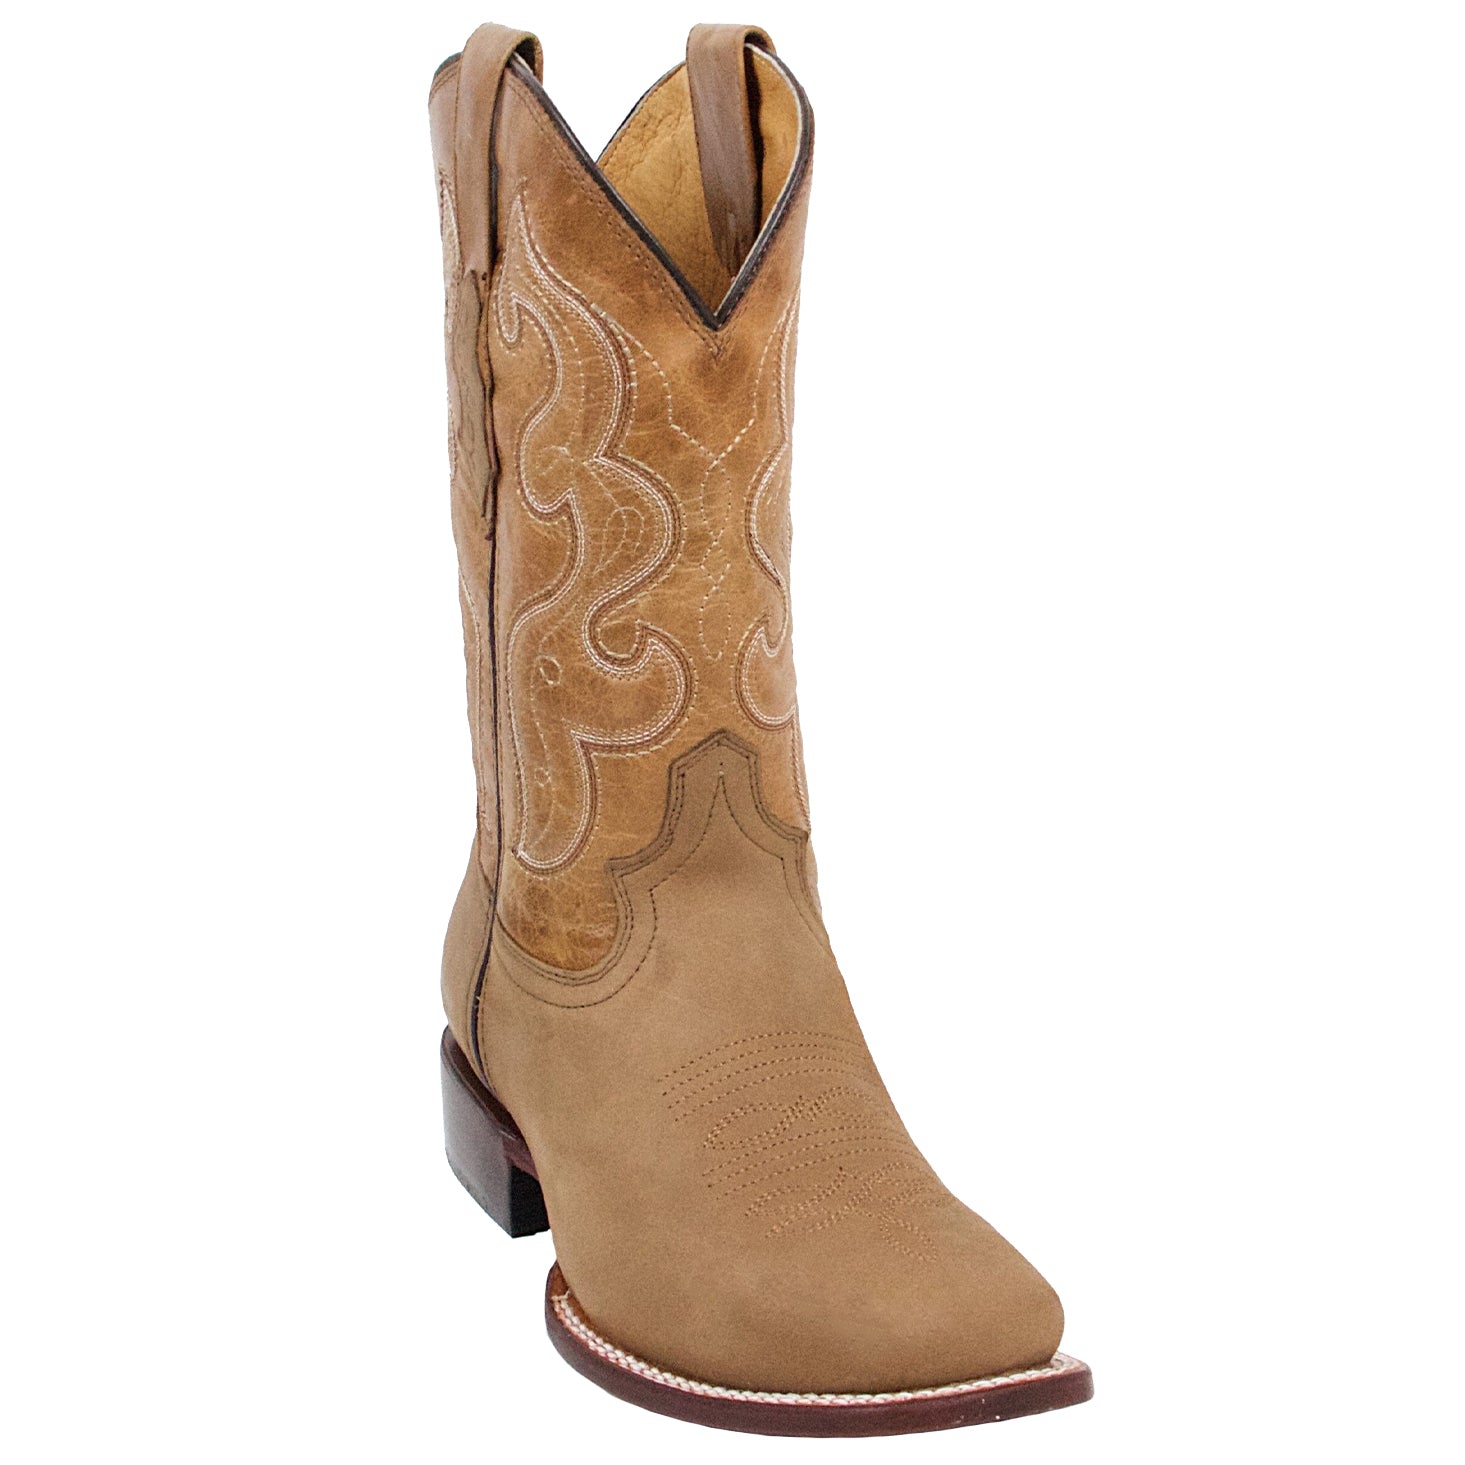 Mens Square Toe Western Boots - Tan